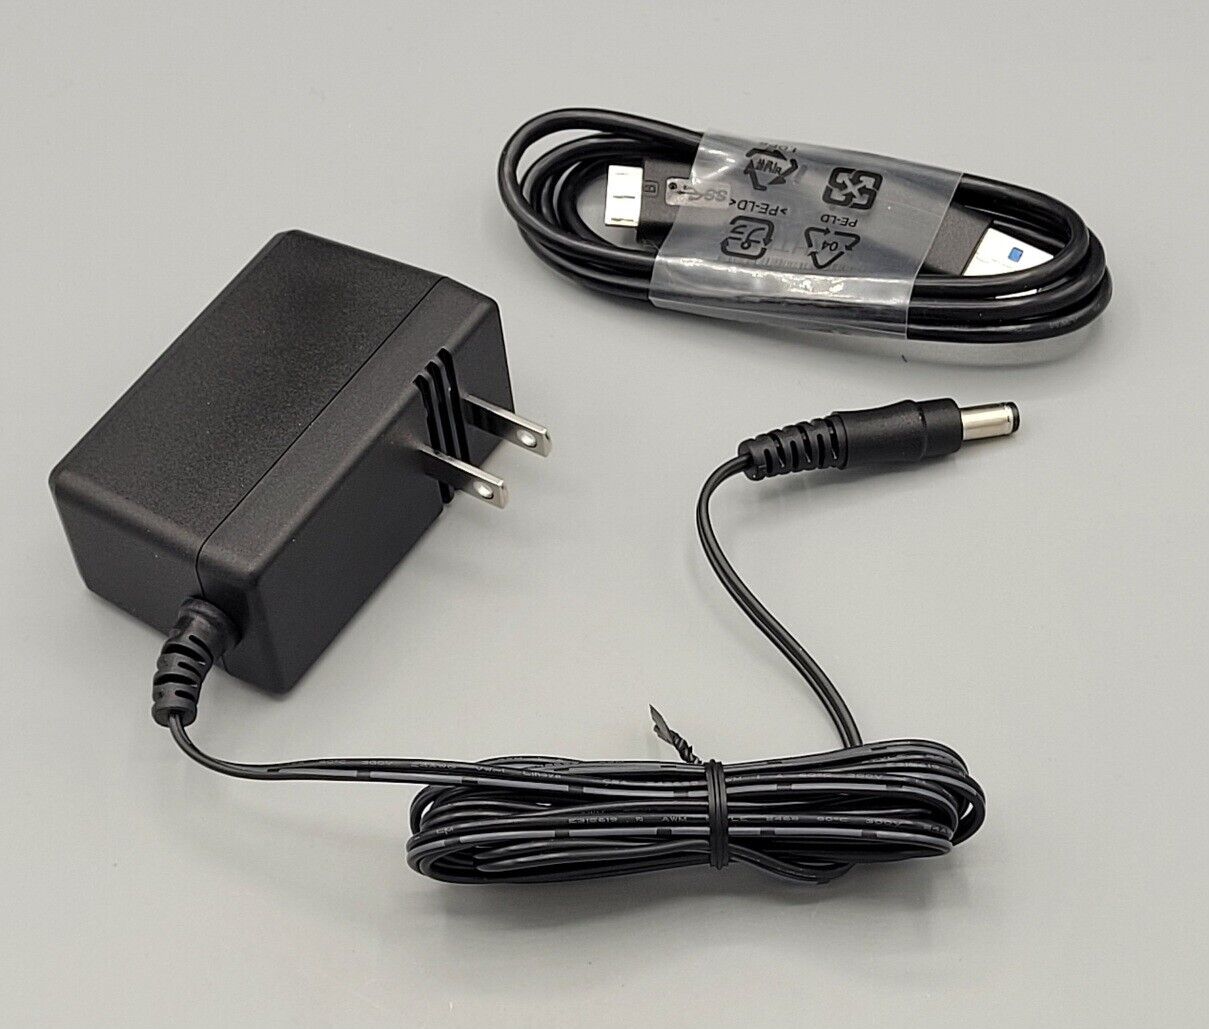 12V - 1.5A AC Adapter/ Power Supply (Various Models) + USB 3.0 cable appx. 3.5ft